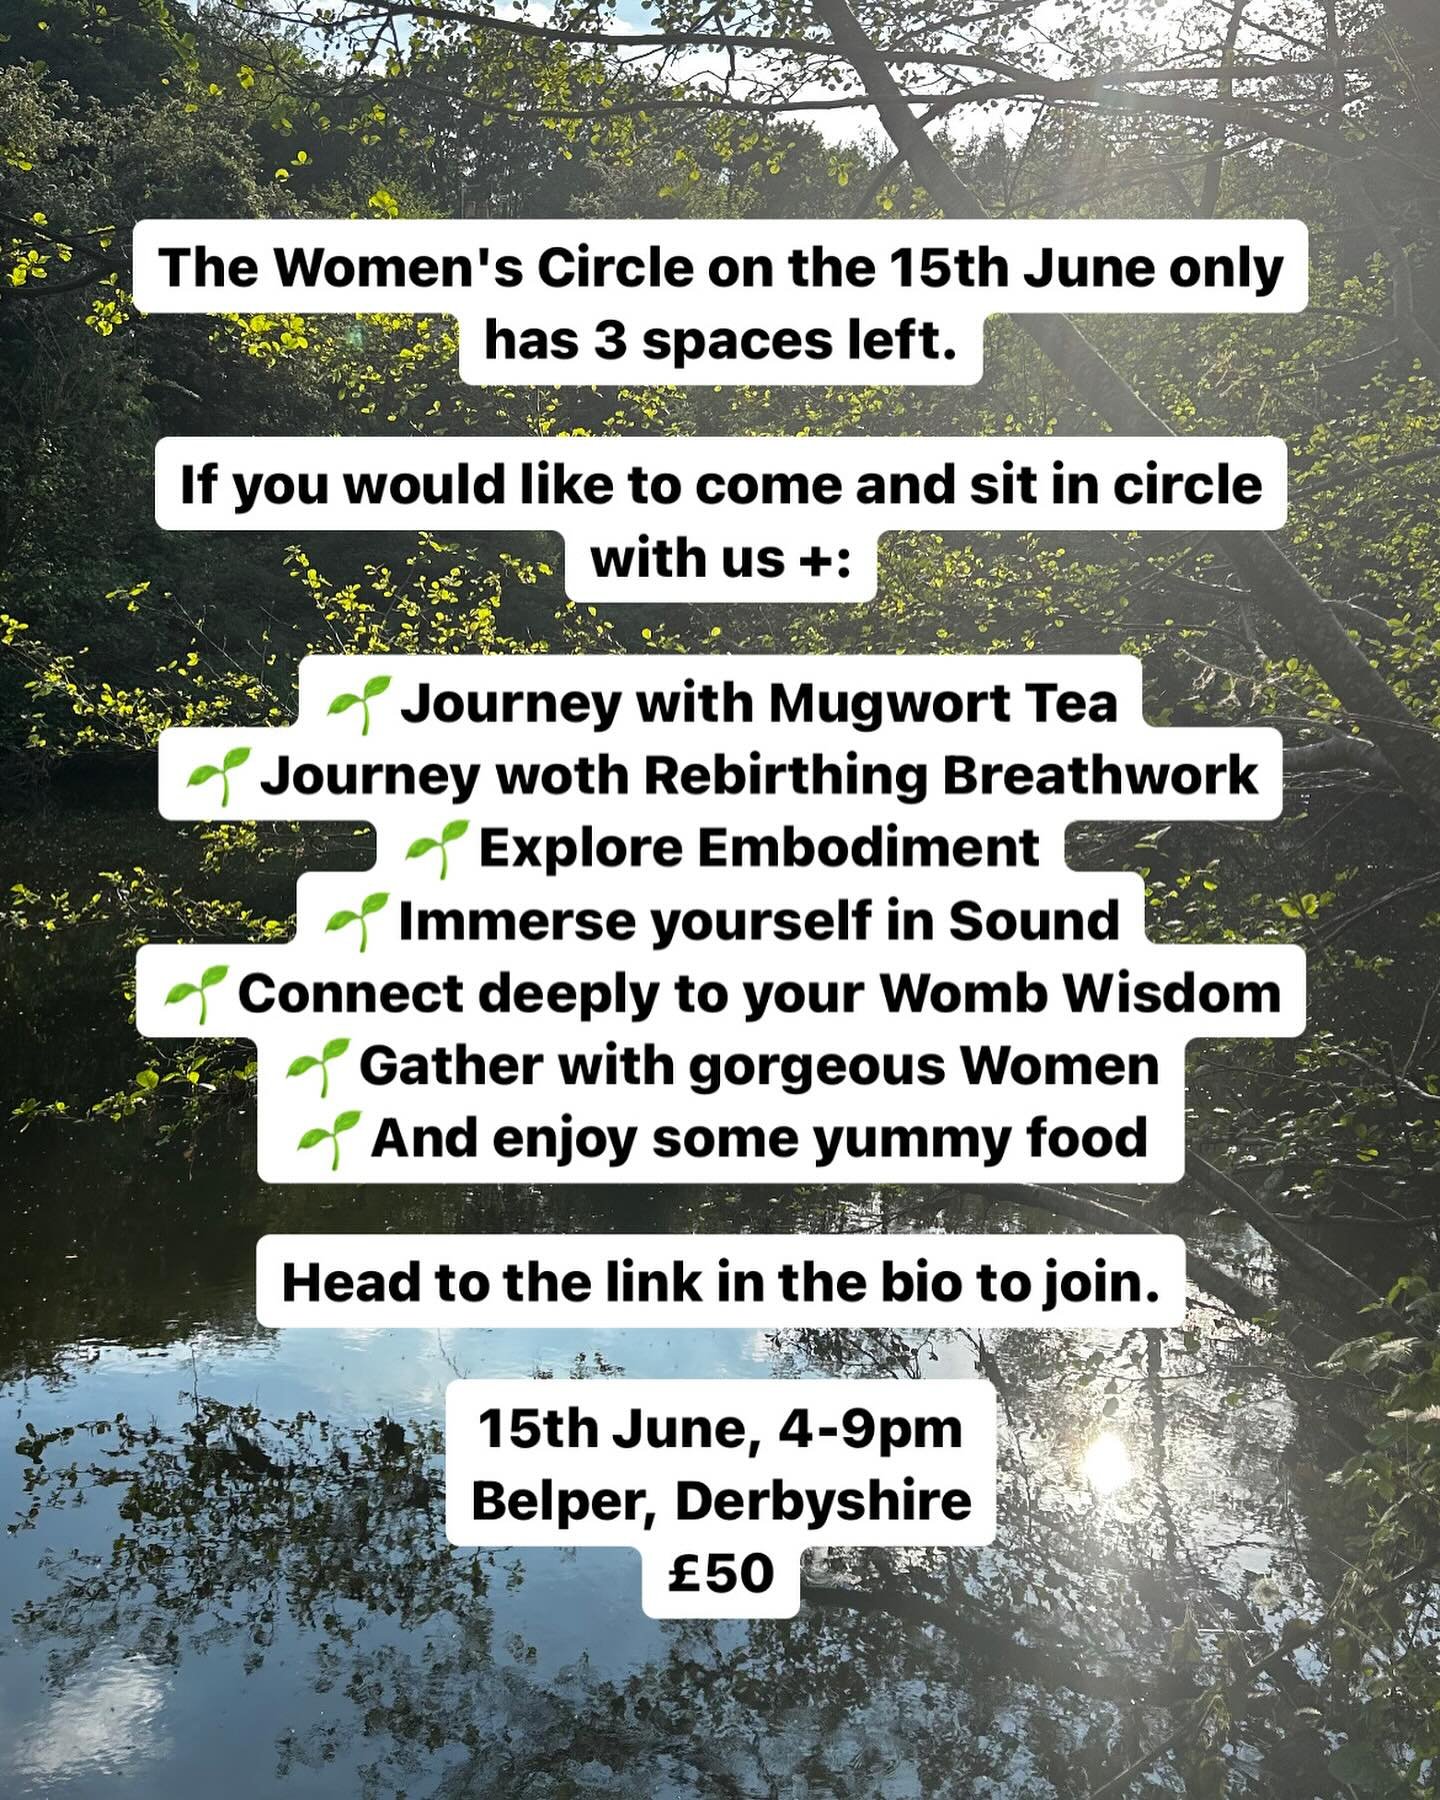 Next months Earthed Body Women&rsquo;s Circle is filling up quickly, if you would like to join us, pleased head to the bio to book your spot. 

We will be harnessing the upcoming Summer Solstice Energy as we Journey deep into our inner worlds.
☀️❤️&z